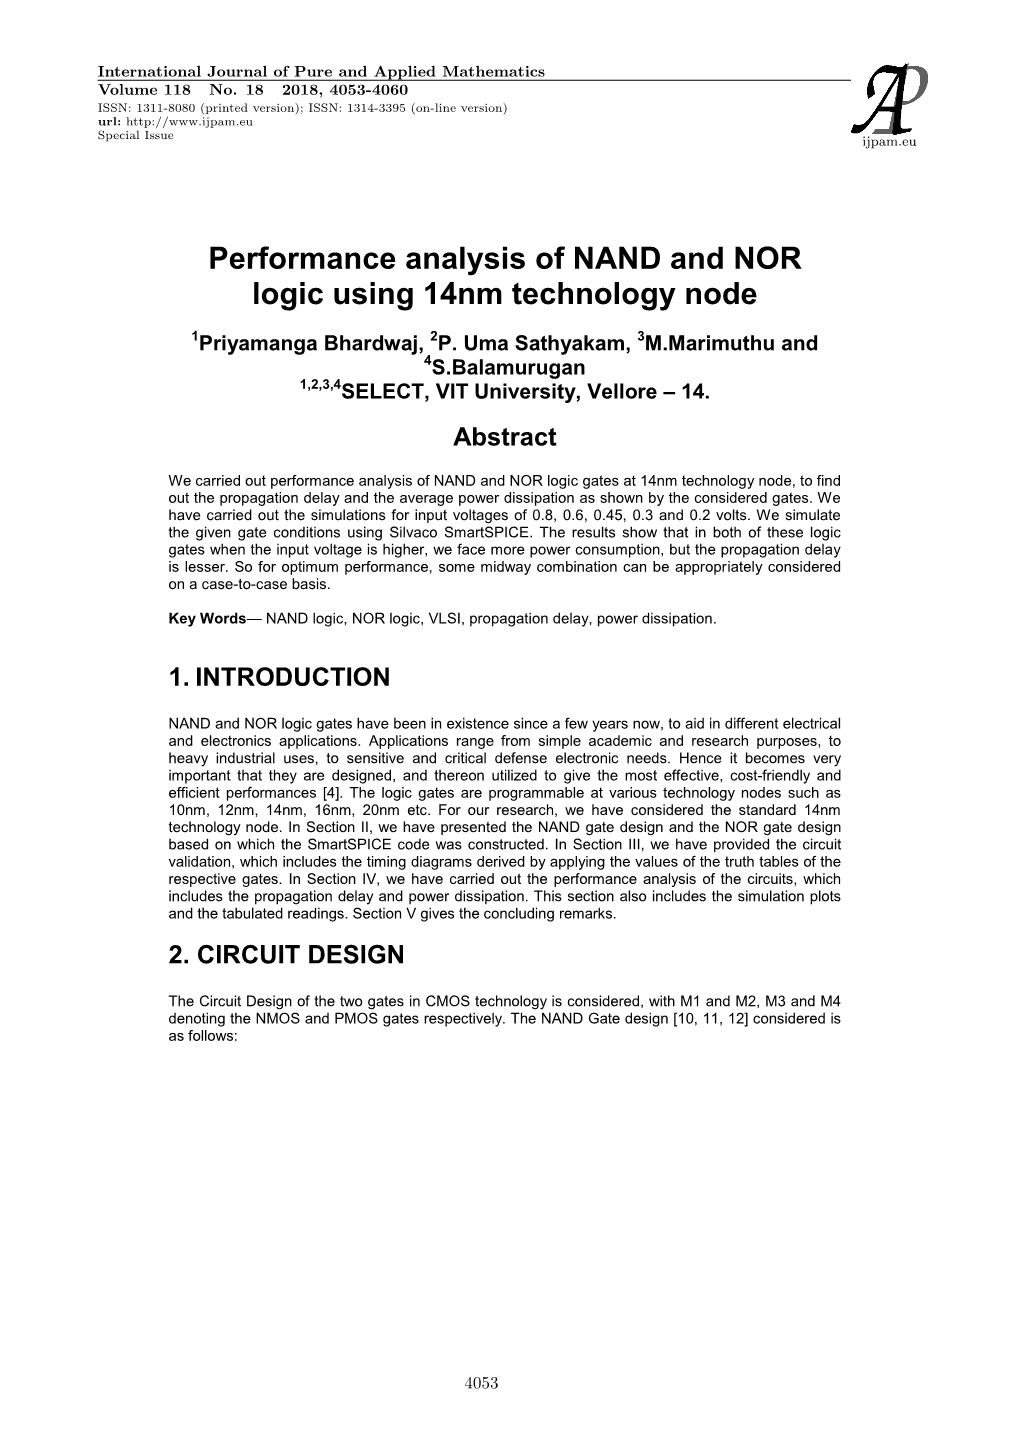 Performance Analysis of NAND and NOR Logic Using 14Nm Technology Node